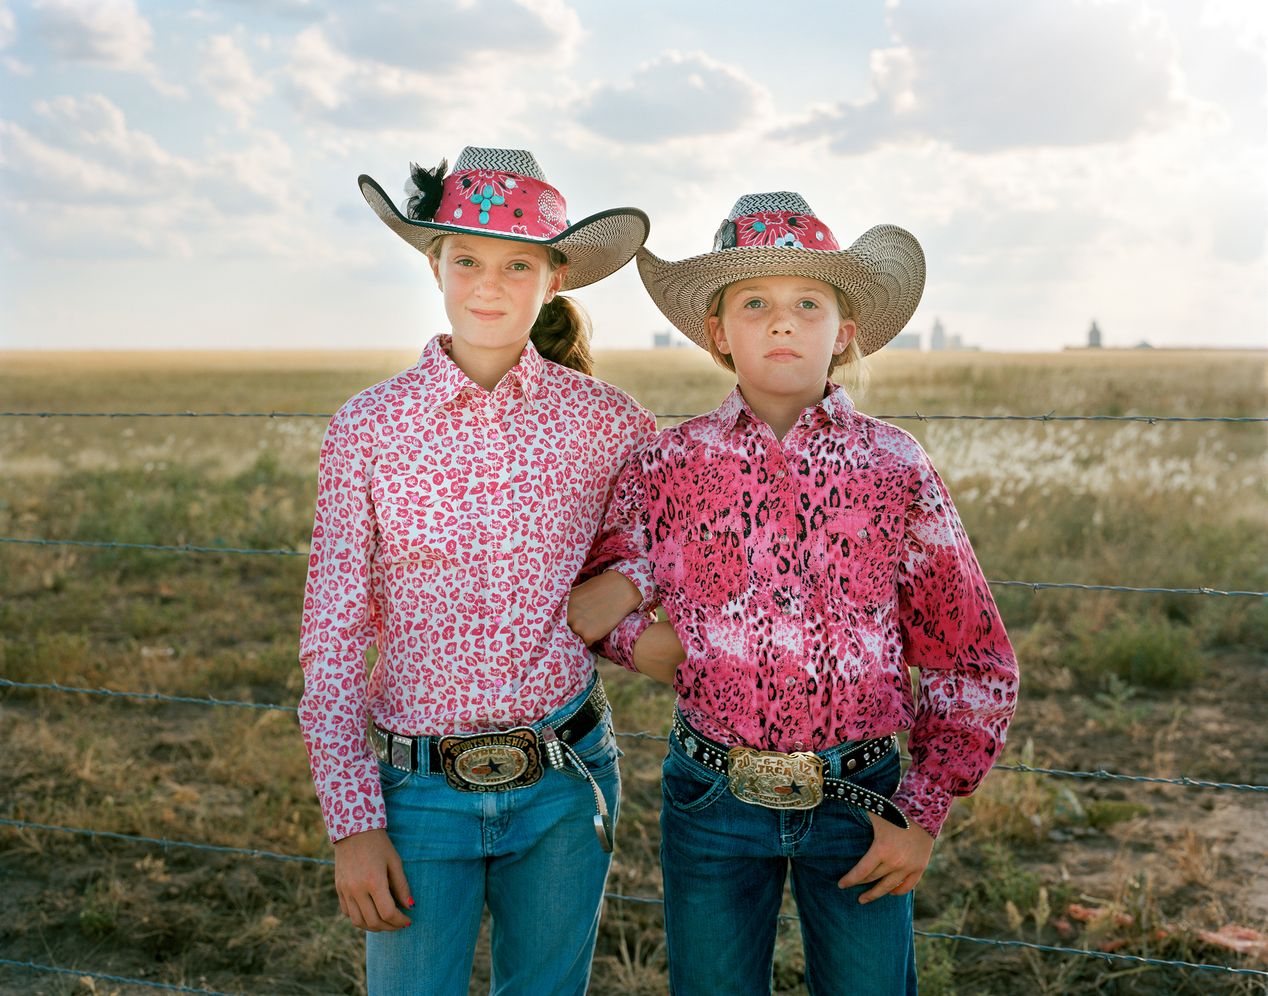 Sisters in pink patterned rodeo attire, environmental portrait photography, Ilona Szwarc, contemporary Los Angeles artist.